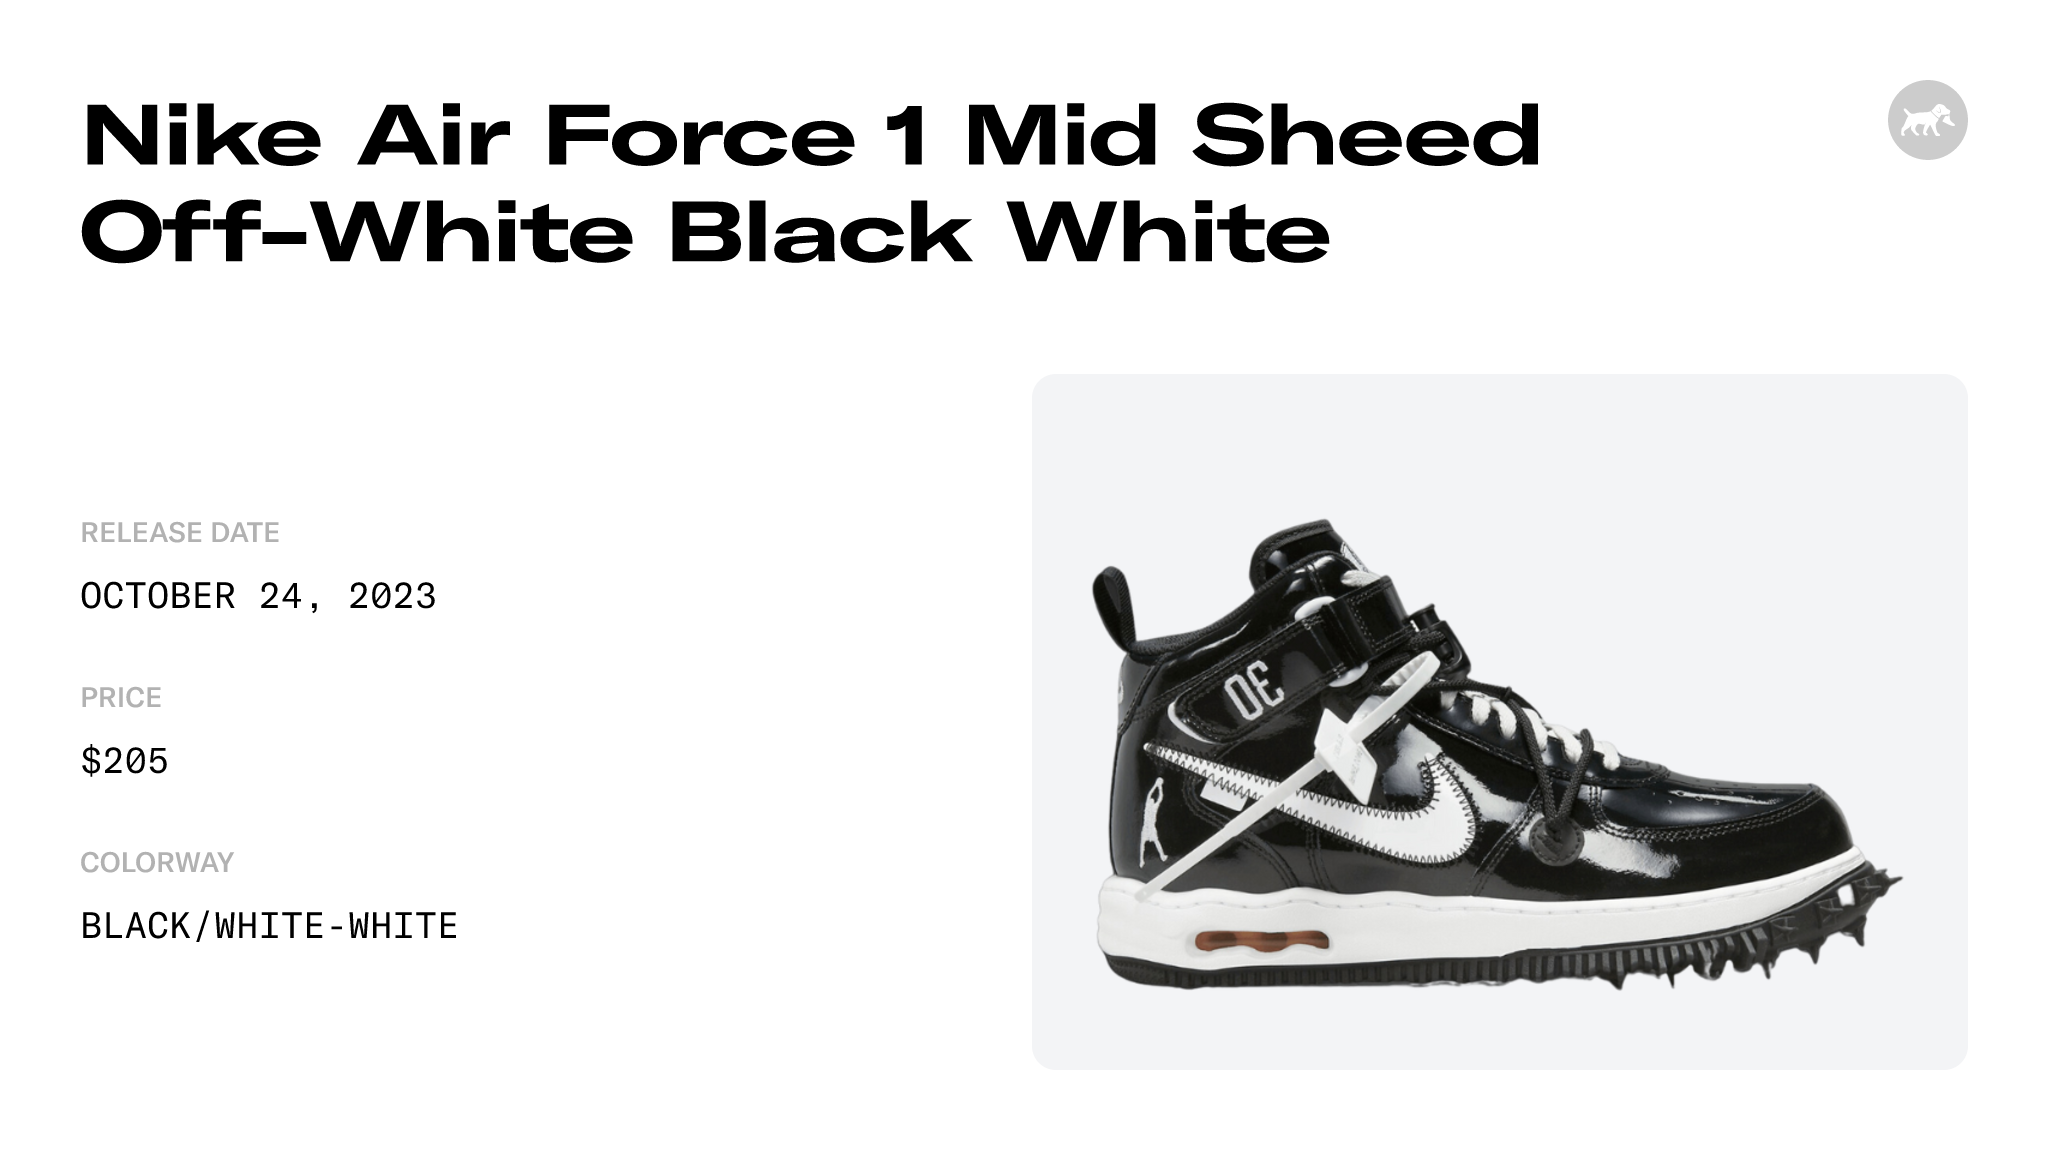 Off-White Nike Air Force 1 Mid Sheed Release Date